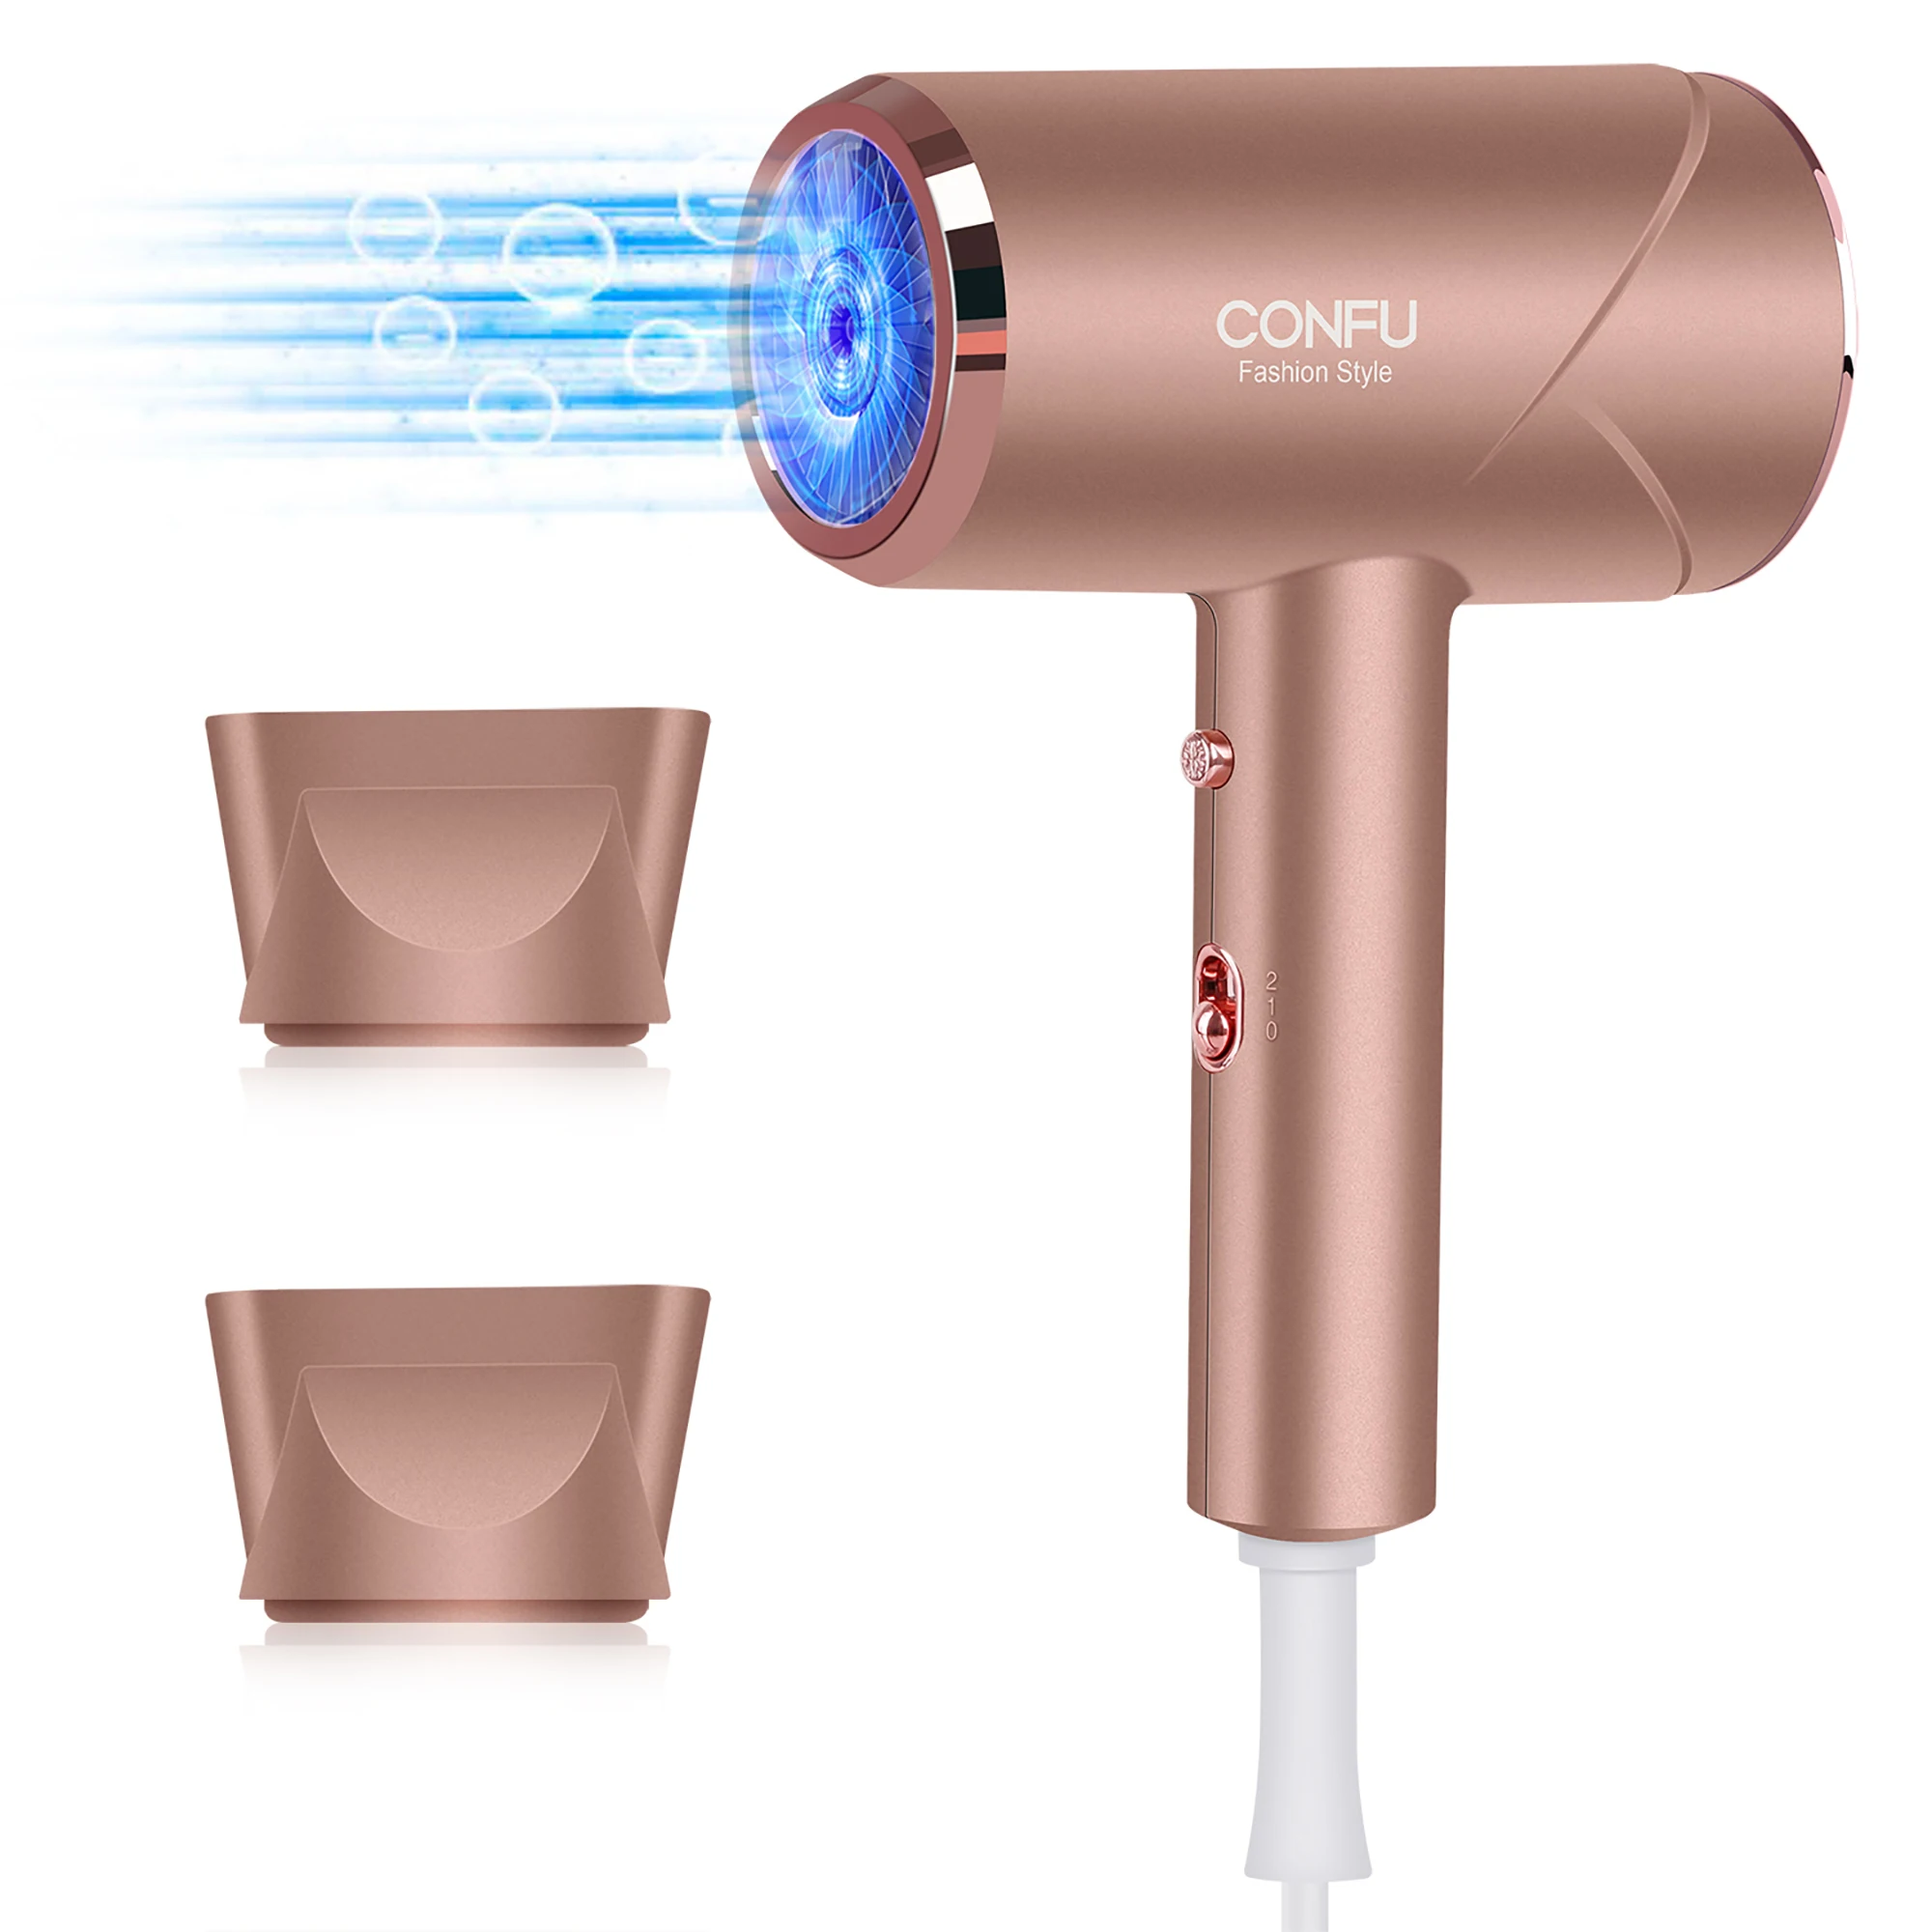 

Ionic Hair Dryer, 1600W Portable Lightweight Blow Dryer, with 2 Concentrator Nozzles and for Home Travel